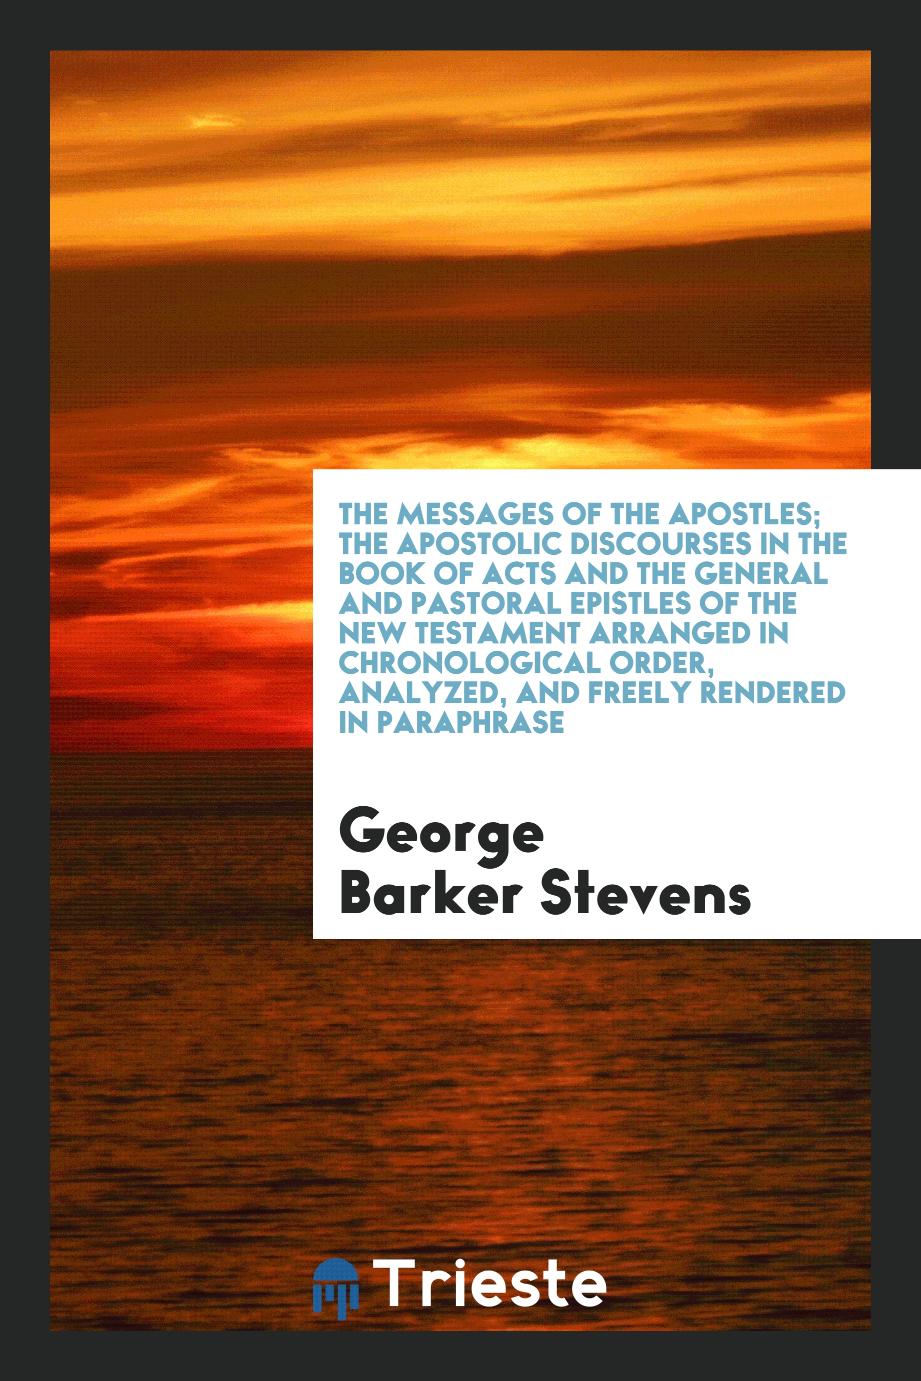 The messages of the apostles; the apostolic discourses in the book of Acts and the General and Pastoral epistles of the New Testament arranged in chronological order, analyzed, and freely rendered in paraphrase